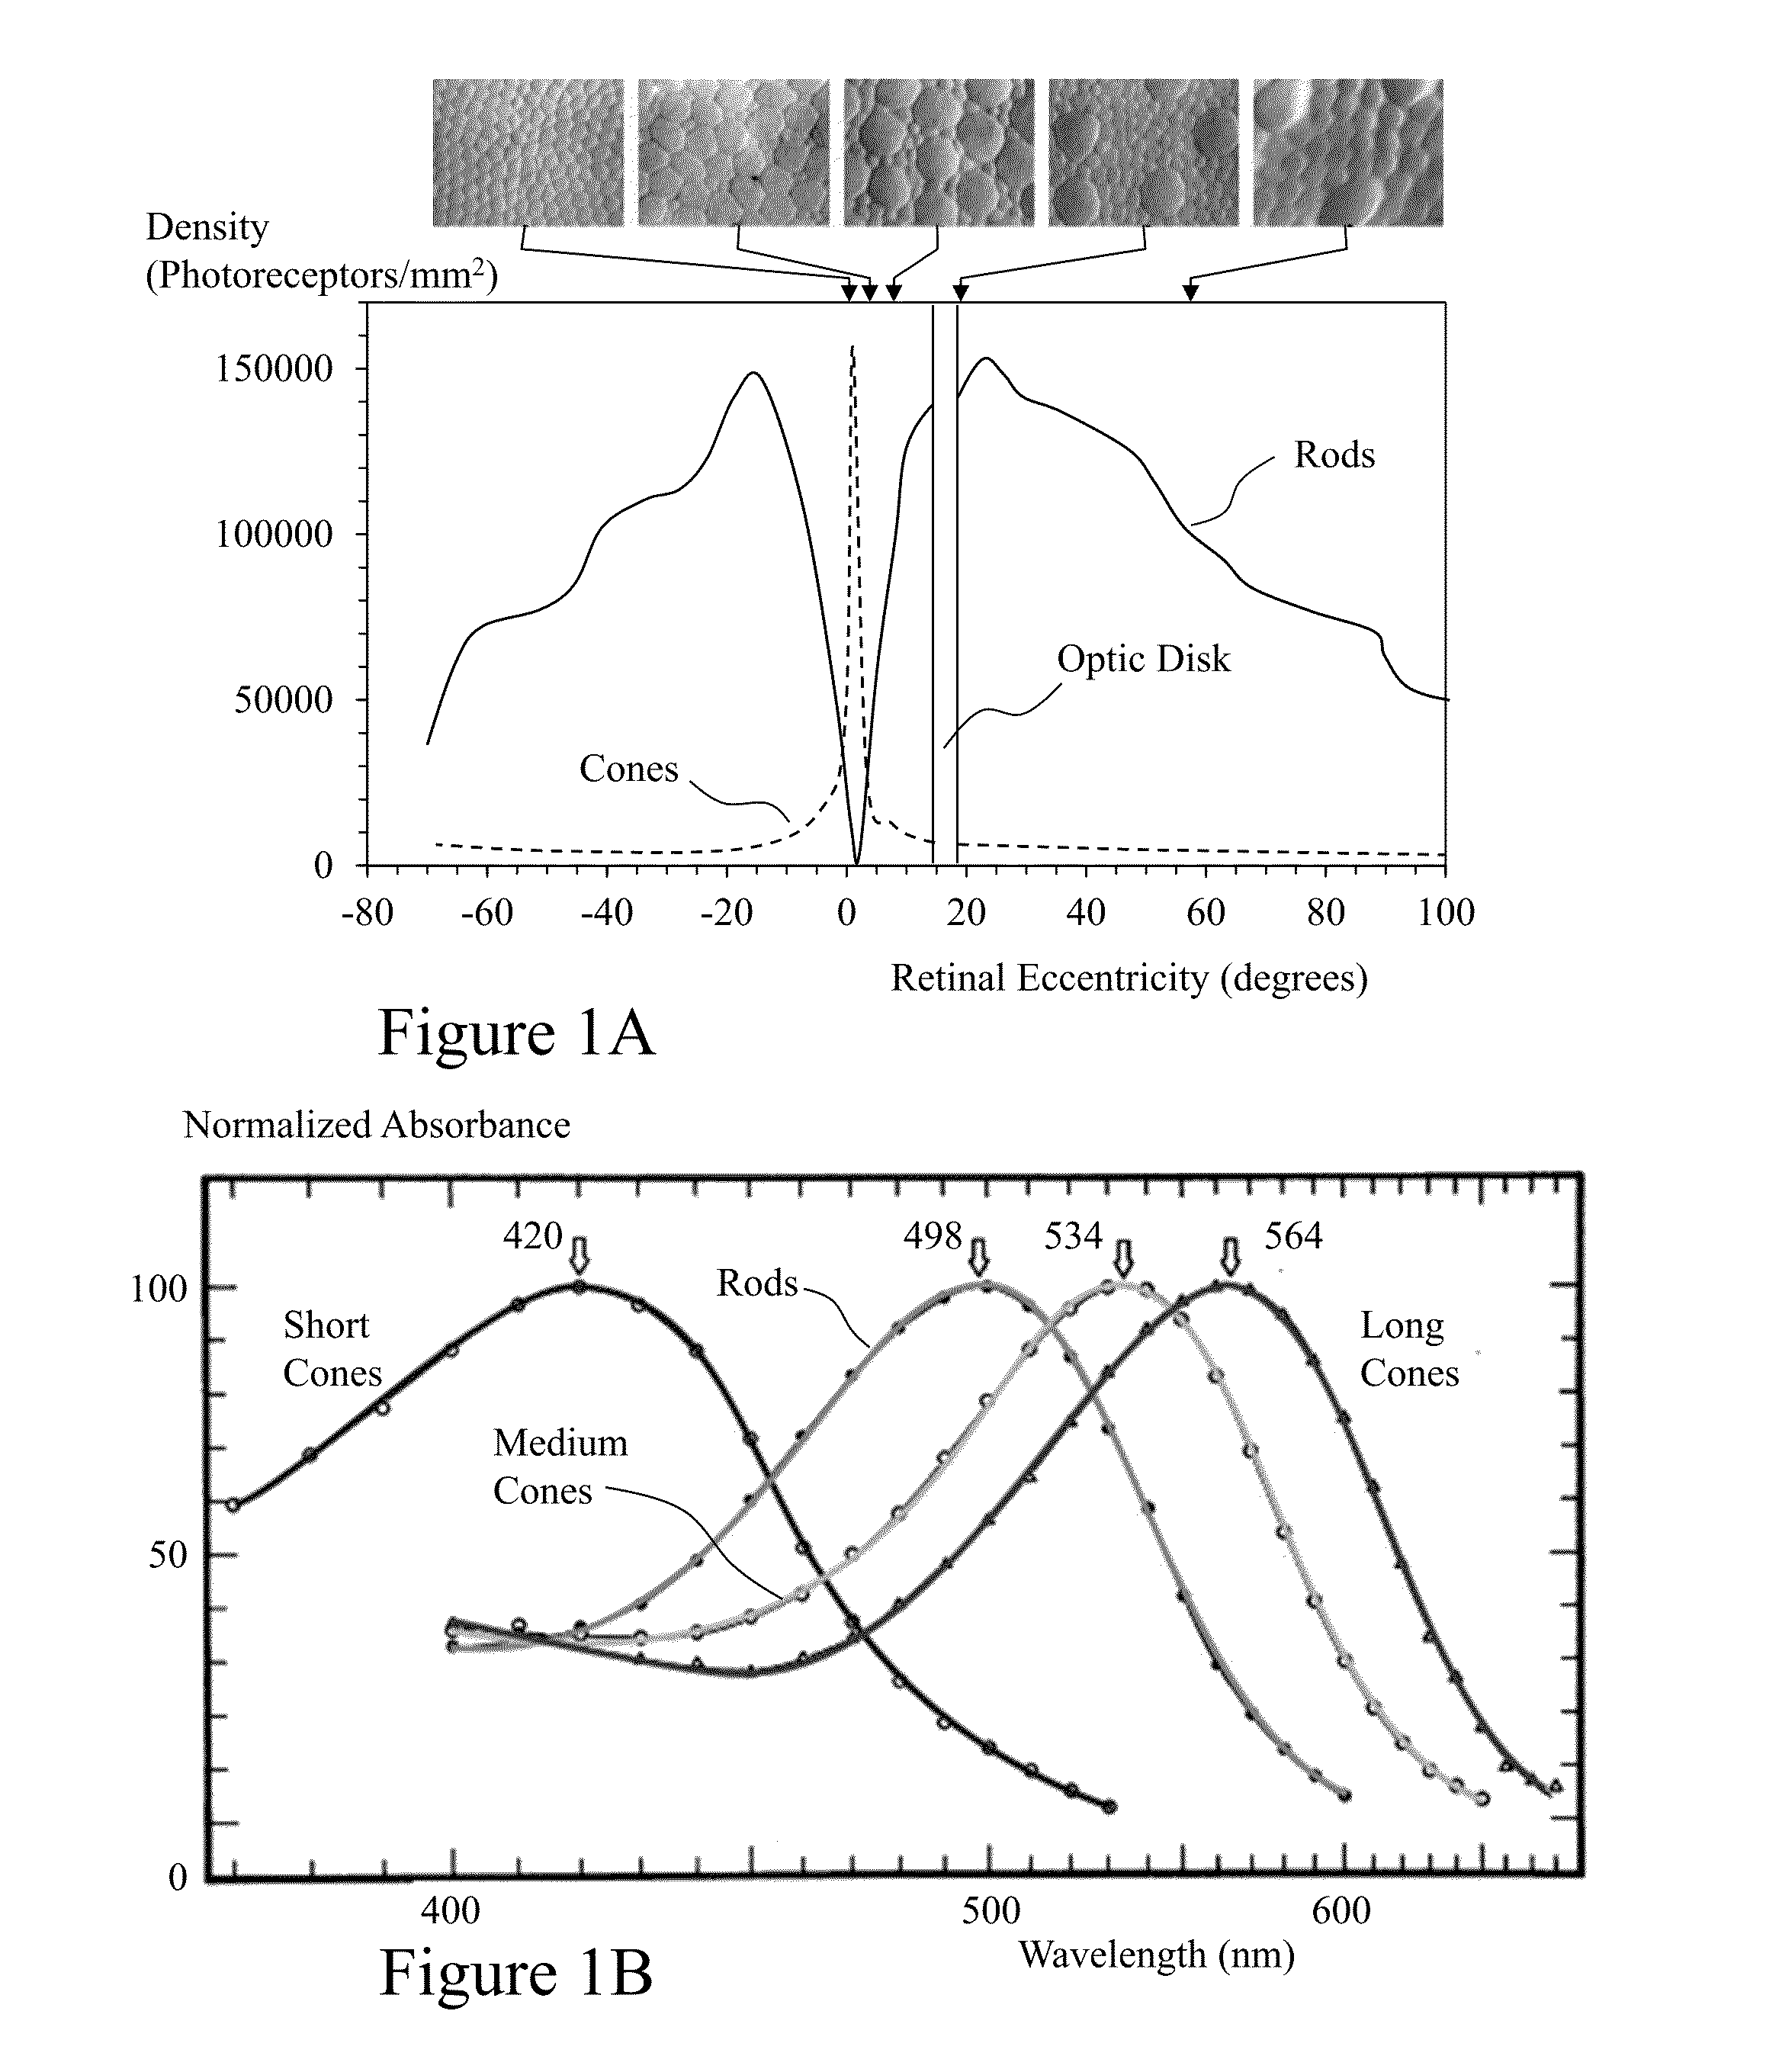 Apparatus and Method for Enhancing Human Visual Performance in a Head Worn Video System